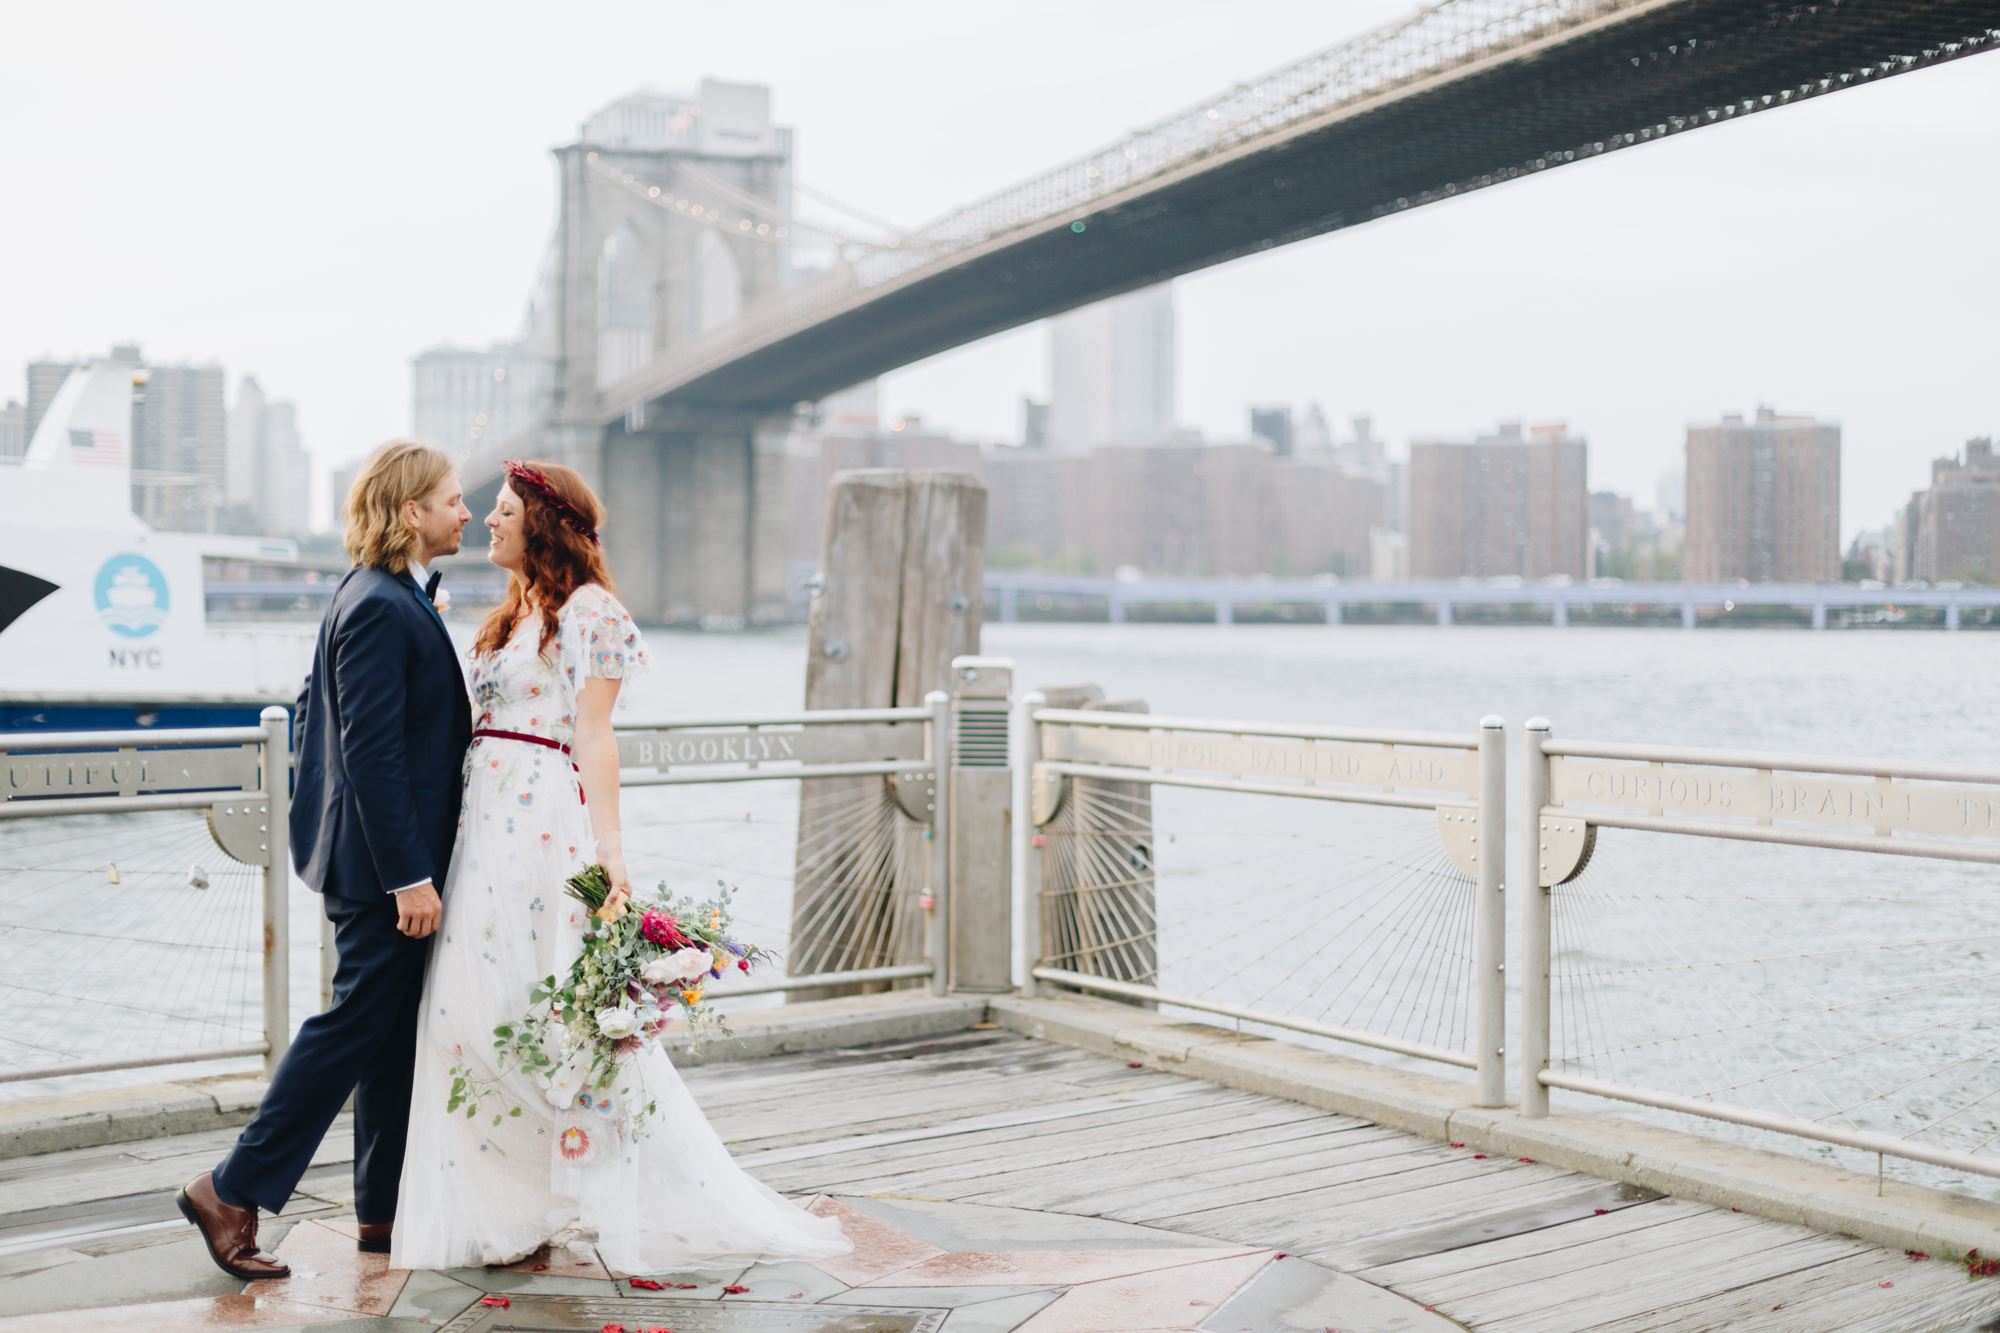 Amazing Elopement Photography in NYC